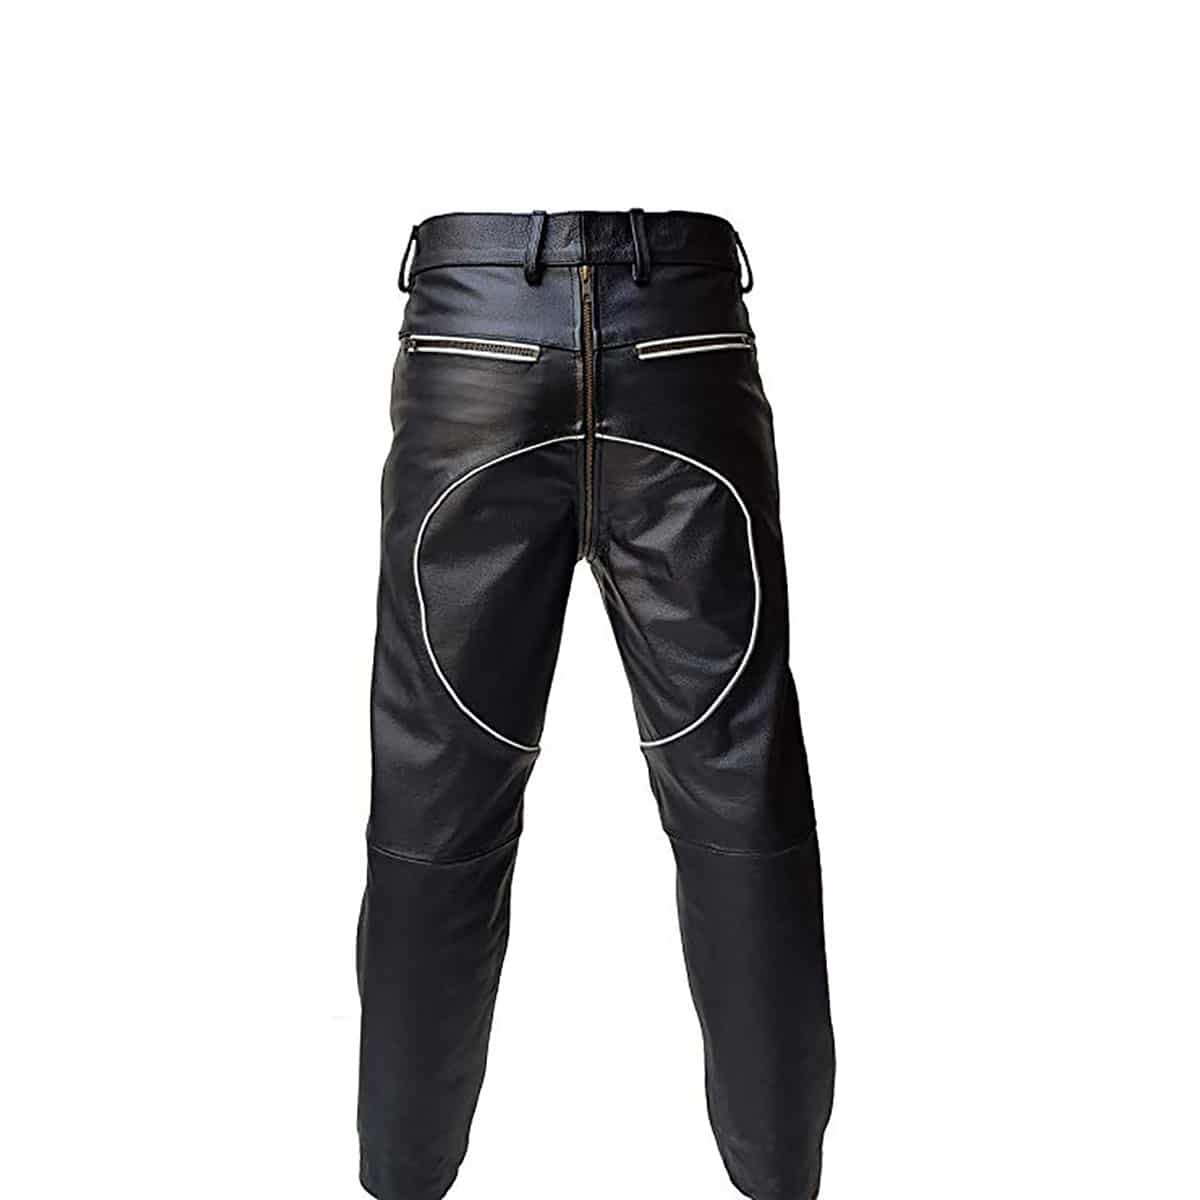 Men Black Leather Biker Style Jeans Pants Trousers with White Piping -J10